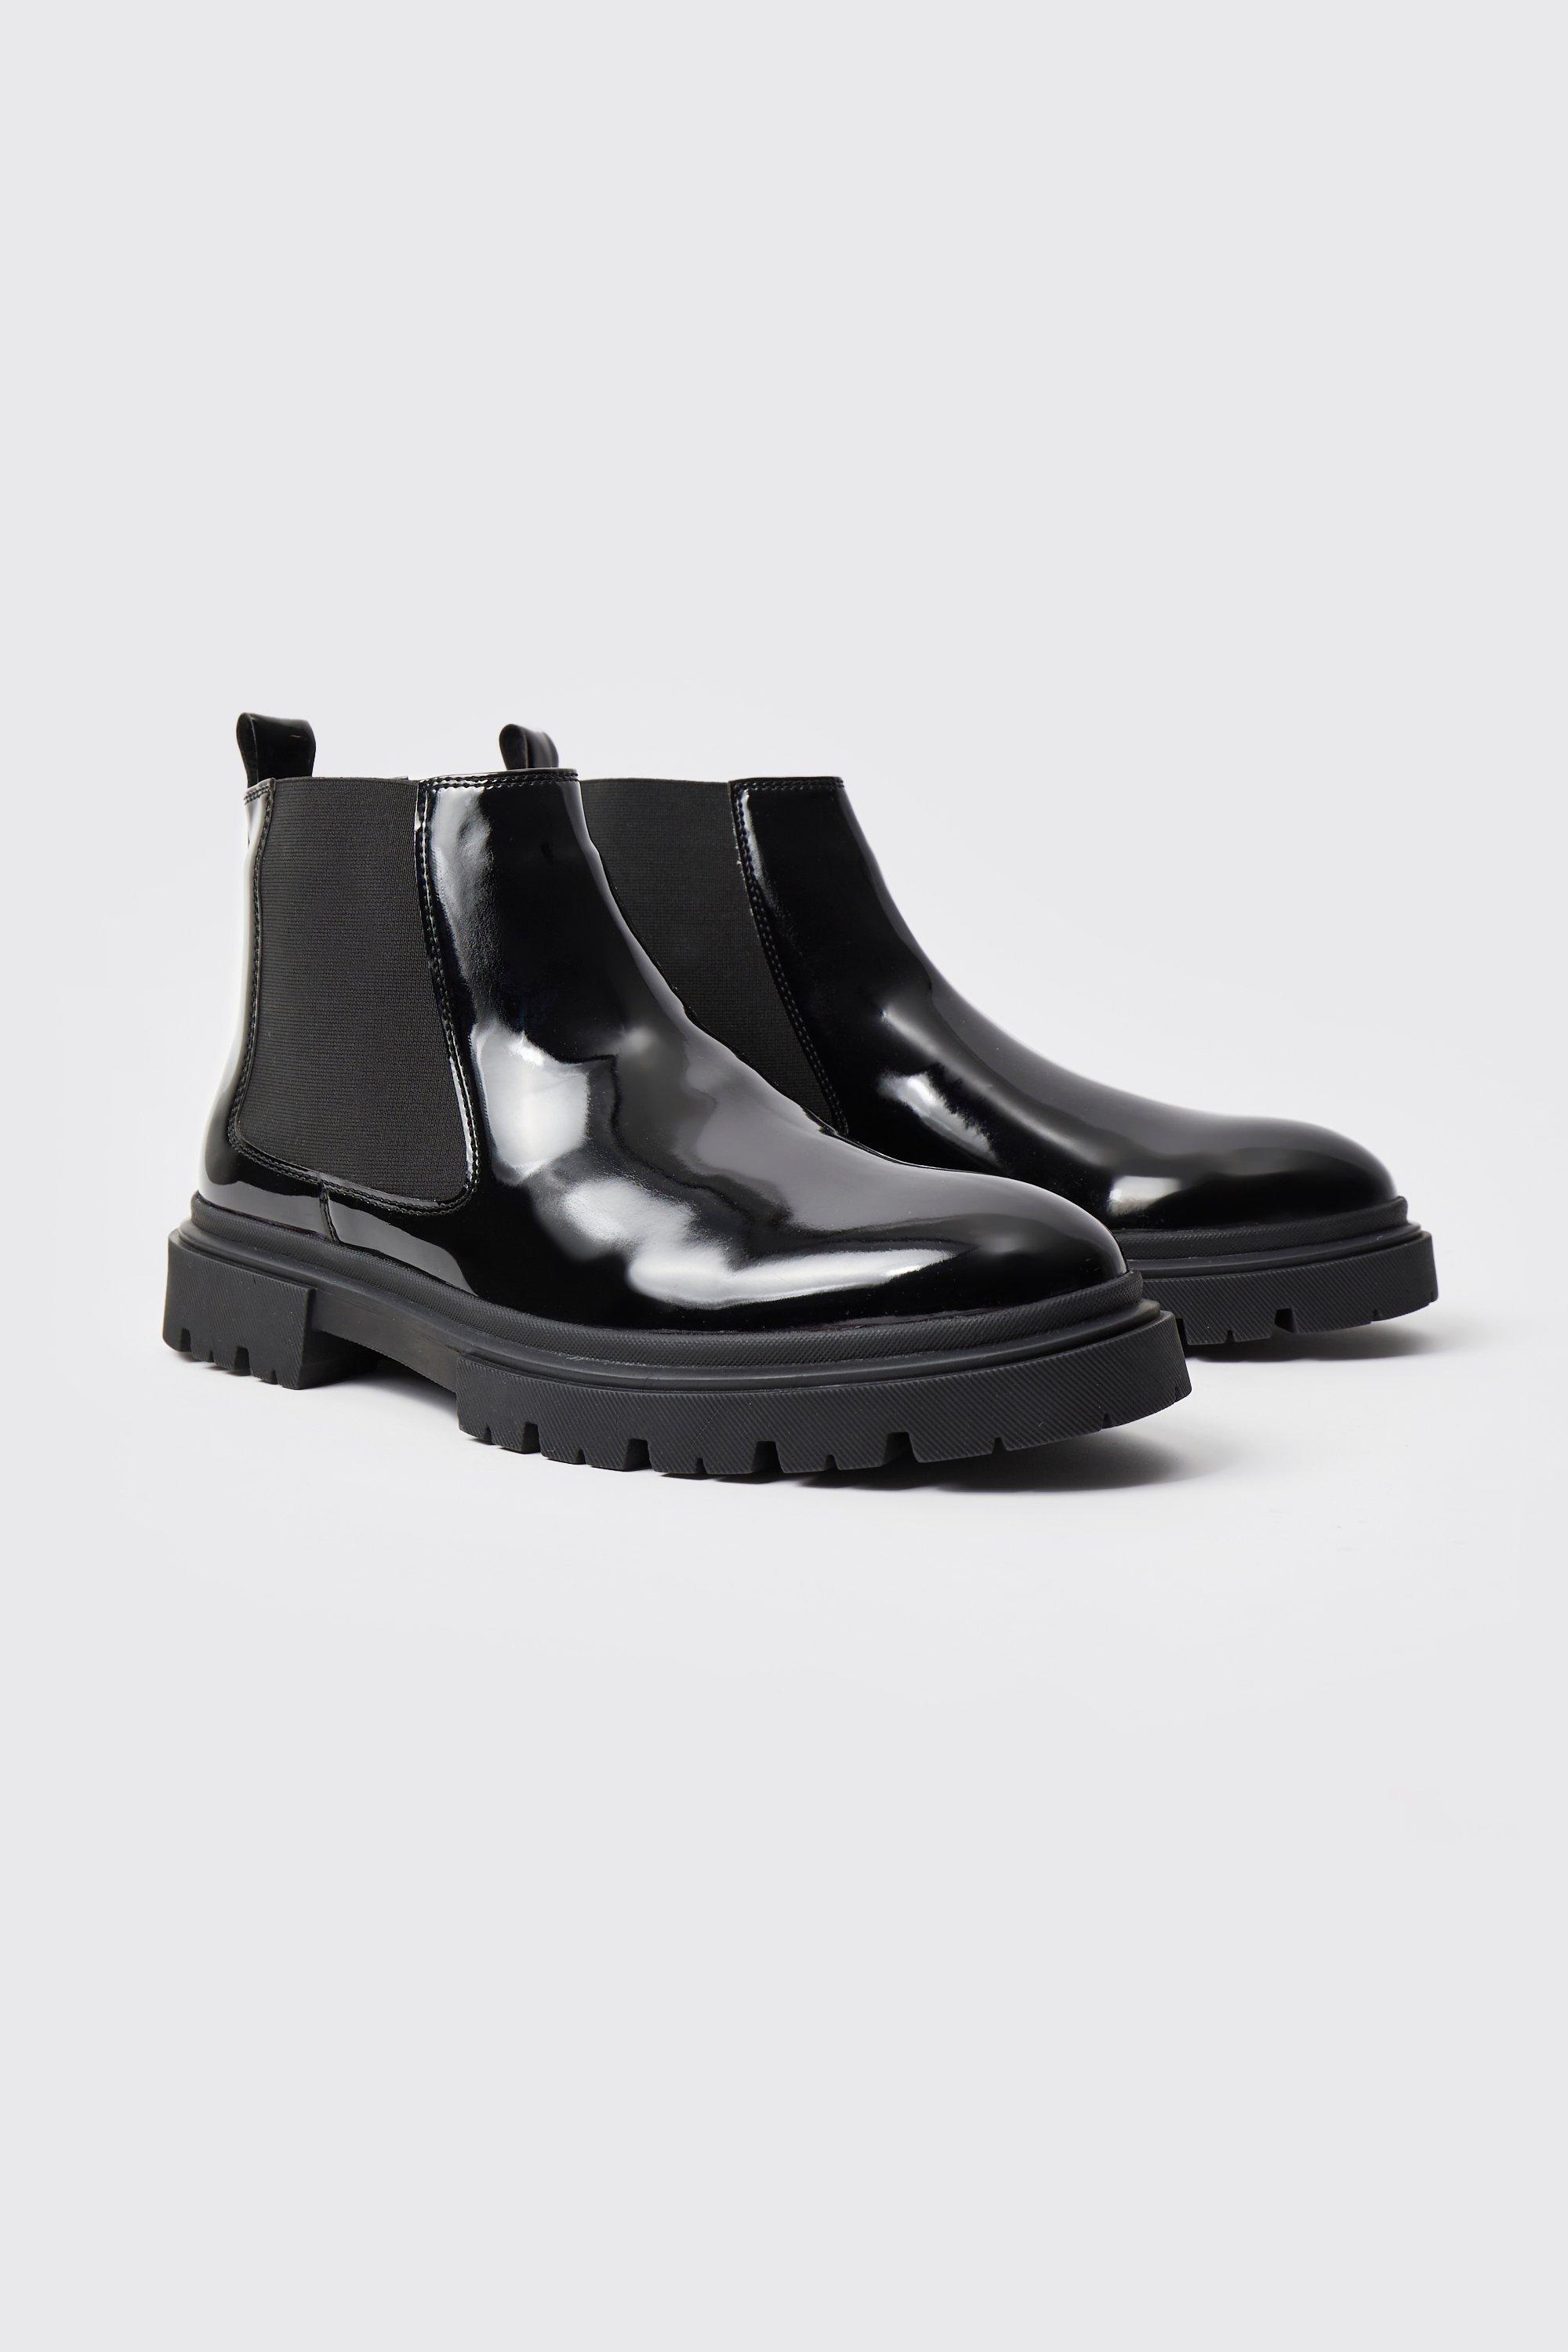 Mens Black Patent Chelsea Boots With Track Sole, Black